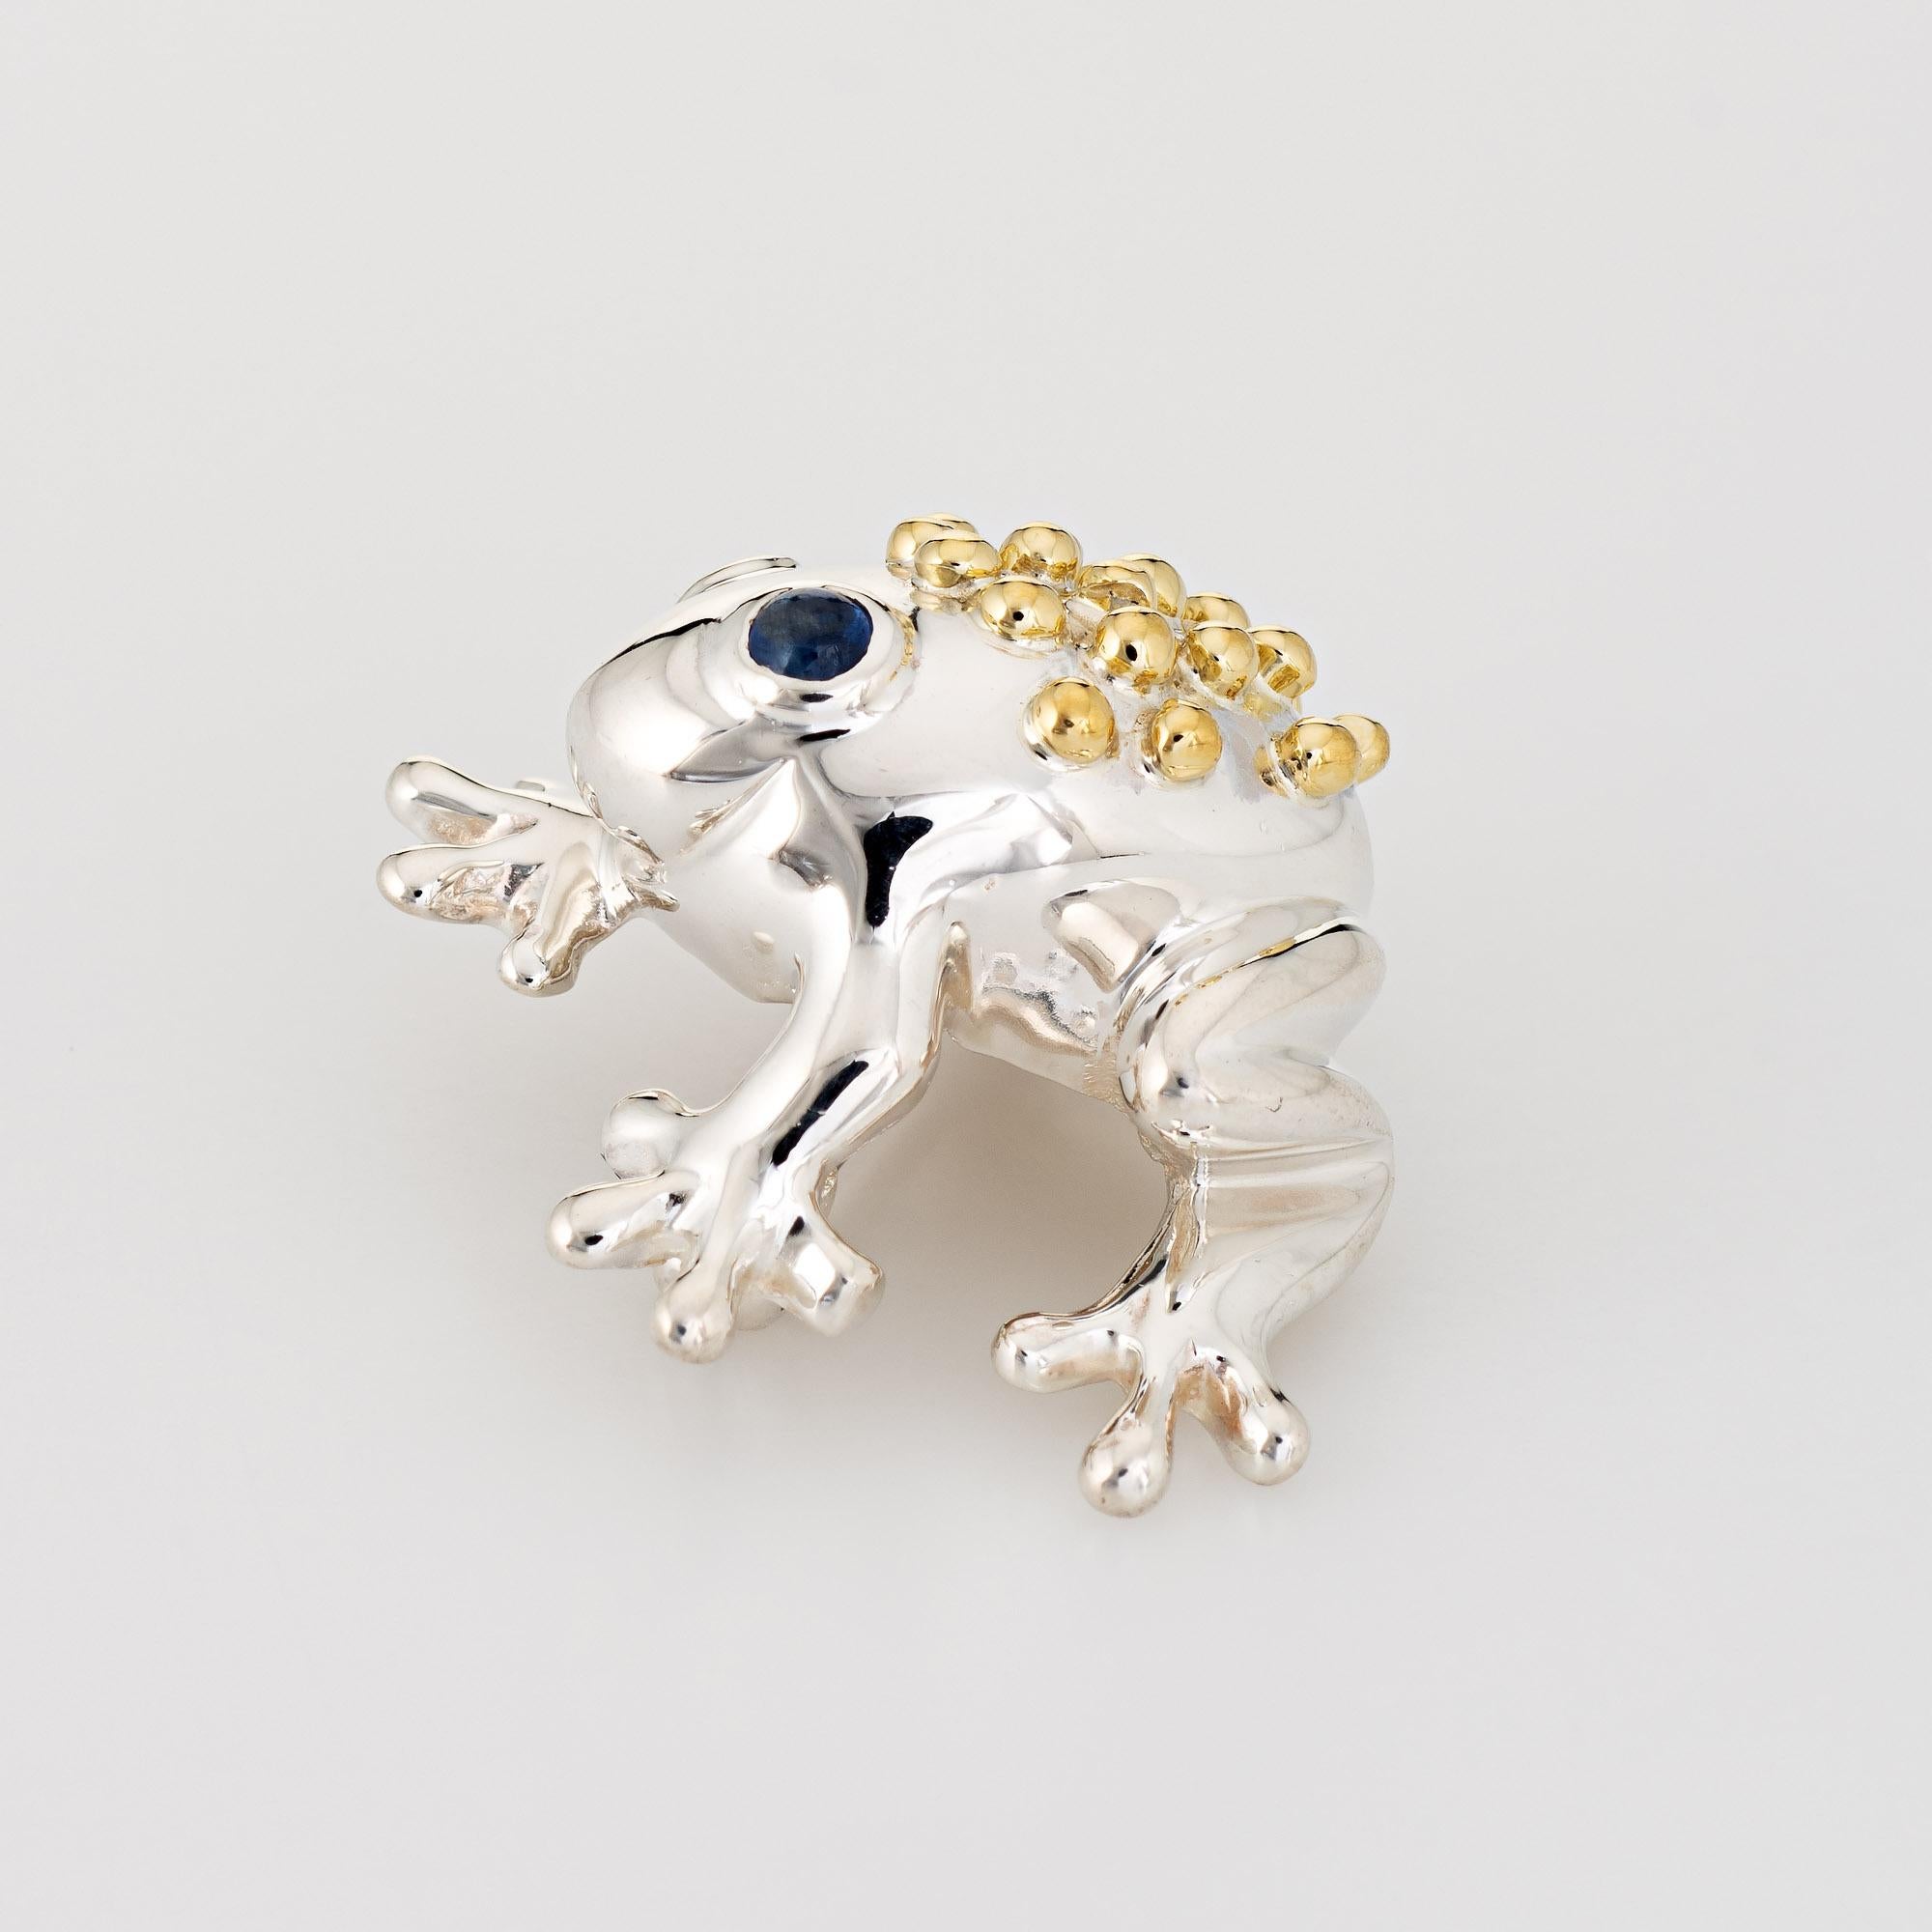 Finely detailed vintage Tiffany & Co frog brooch crafted in sterling silver & 18k yellow gold (circa 1990s). 

The sweet little frog features a textured back in 18k yellow gold with cabochon set blue sapphire eyes. Small in scale, the brooch is